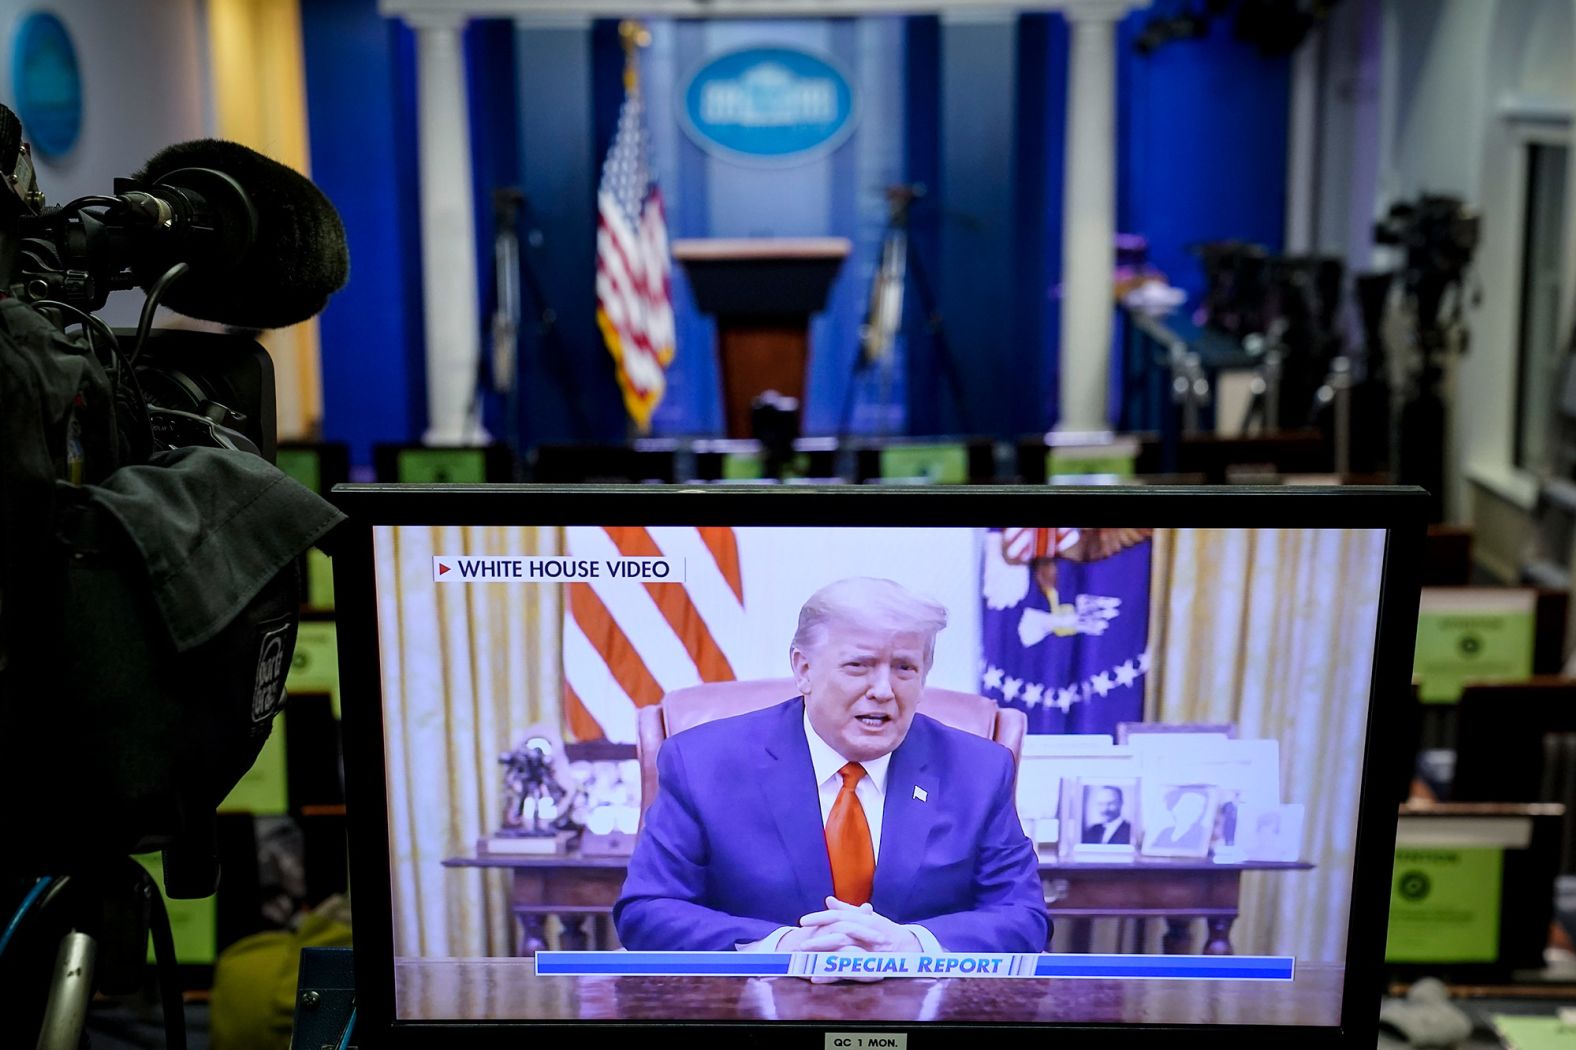 Trump is seen on a television monitor inside an empty press briefing room on January 13. <a href="index.php?page=&url=https%3A%2F%2Fwww.cnn.com%2Fpolitics%2Flive-news%2Fhouse-trump-impeachment-vote-01-13-21%2Fh_2fda1578621952f7f2a4d7378d4d9ab4" target="_blank">In a video message released after the vote,</a> Trump did not acknowledge his second impeachment. He instead called for peace and claimed that those who mobbed the Capitol are not his "true" supporters.